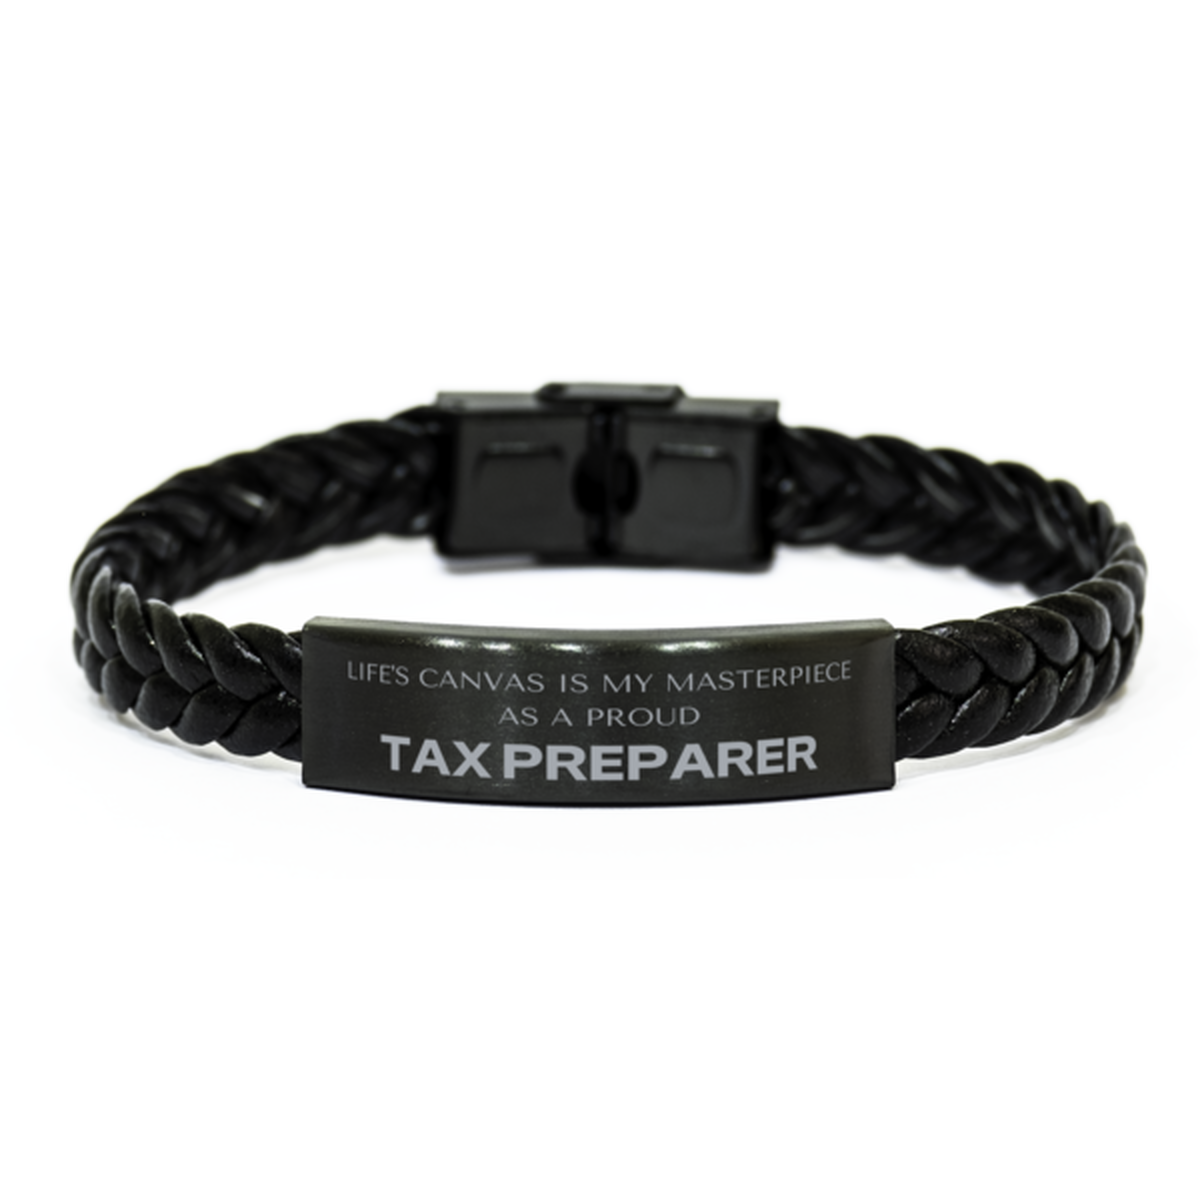 Proud Tax Preparer Gifts, Life's canvas is my masterpiece, Epic Birthday Christmas Unique Braided Leather Bracelet For Tax Preparer, Coworkers, Men, Women, Friends